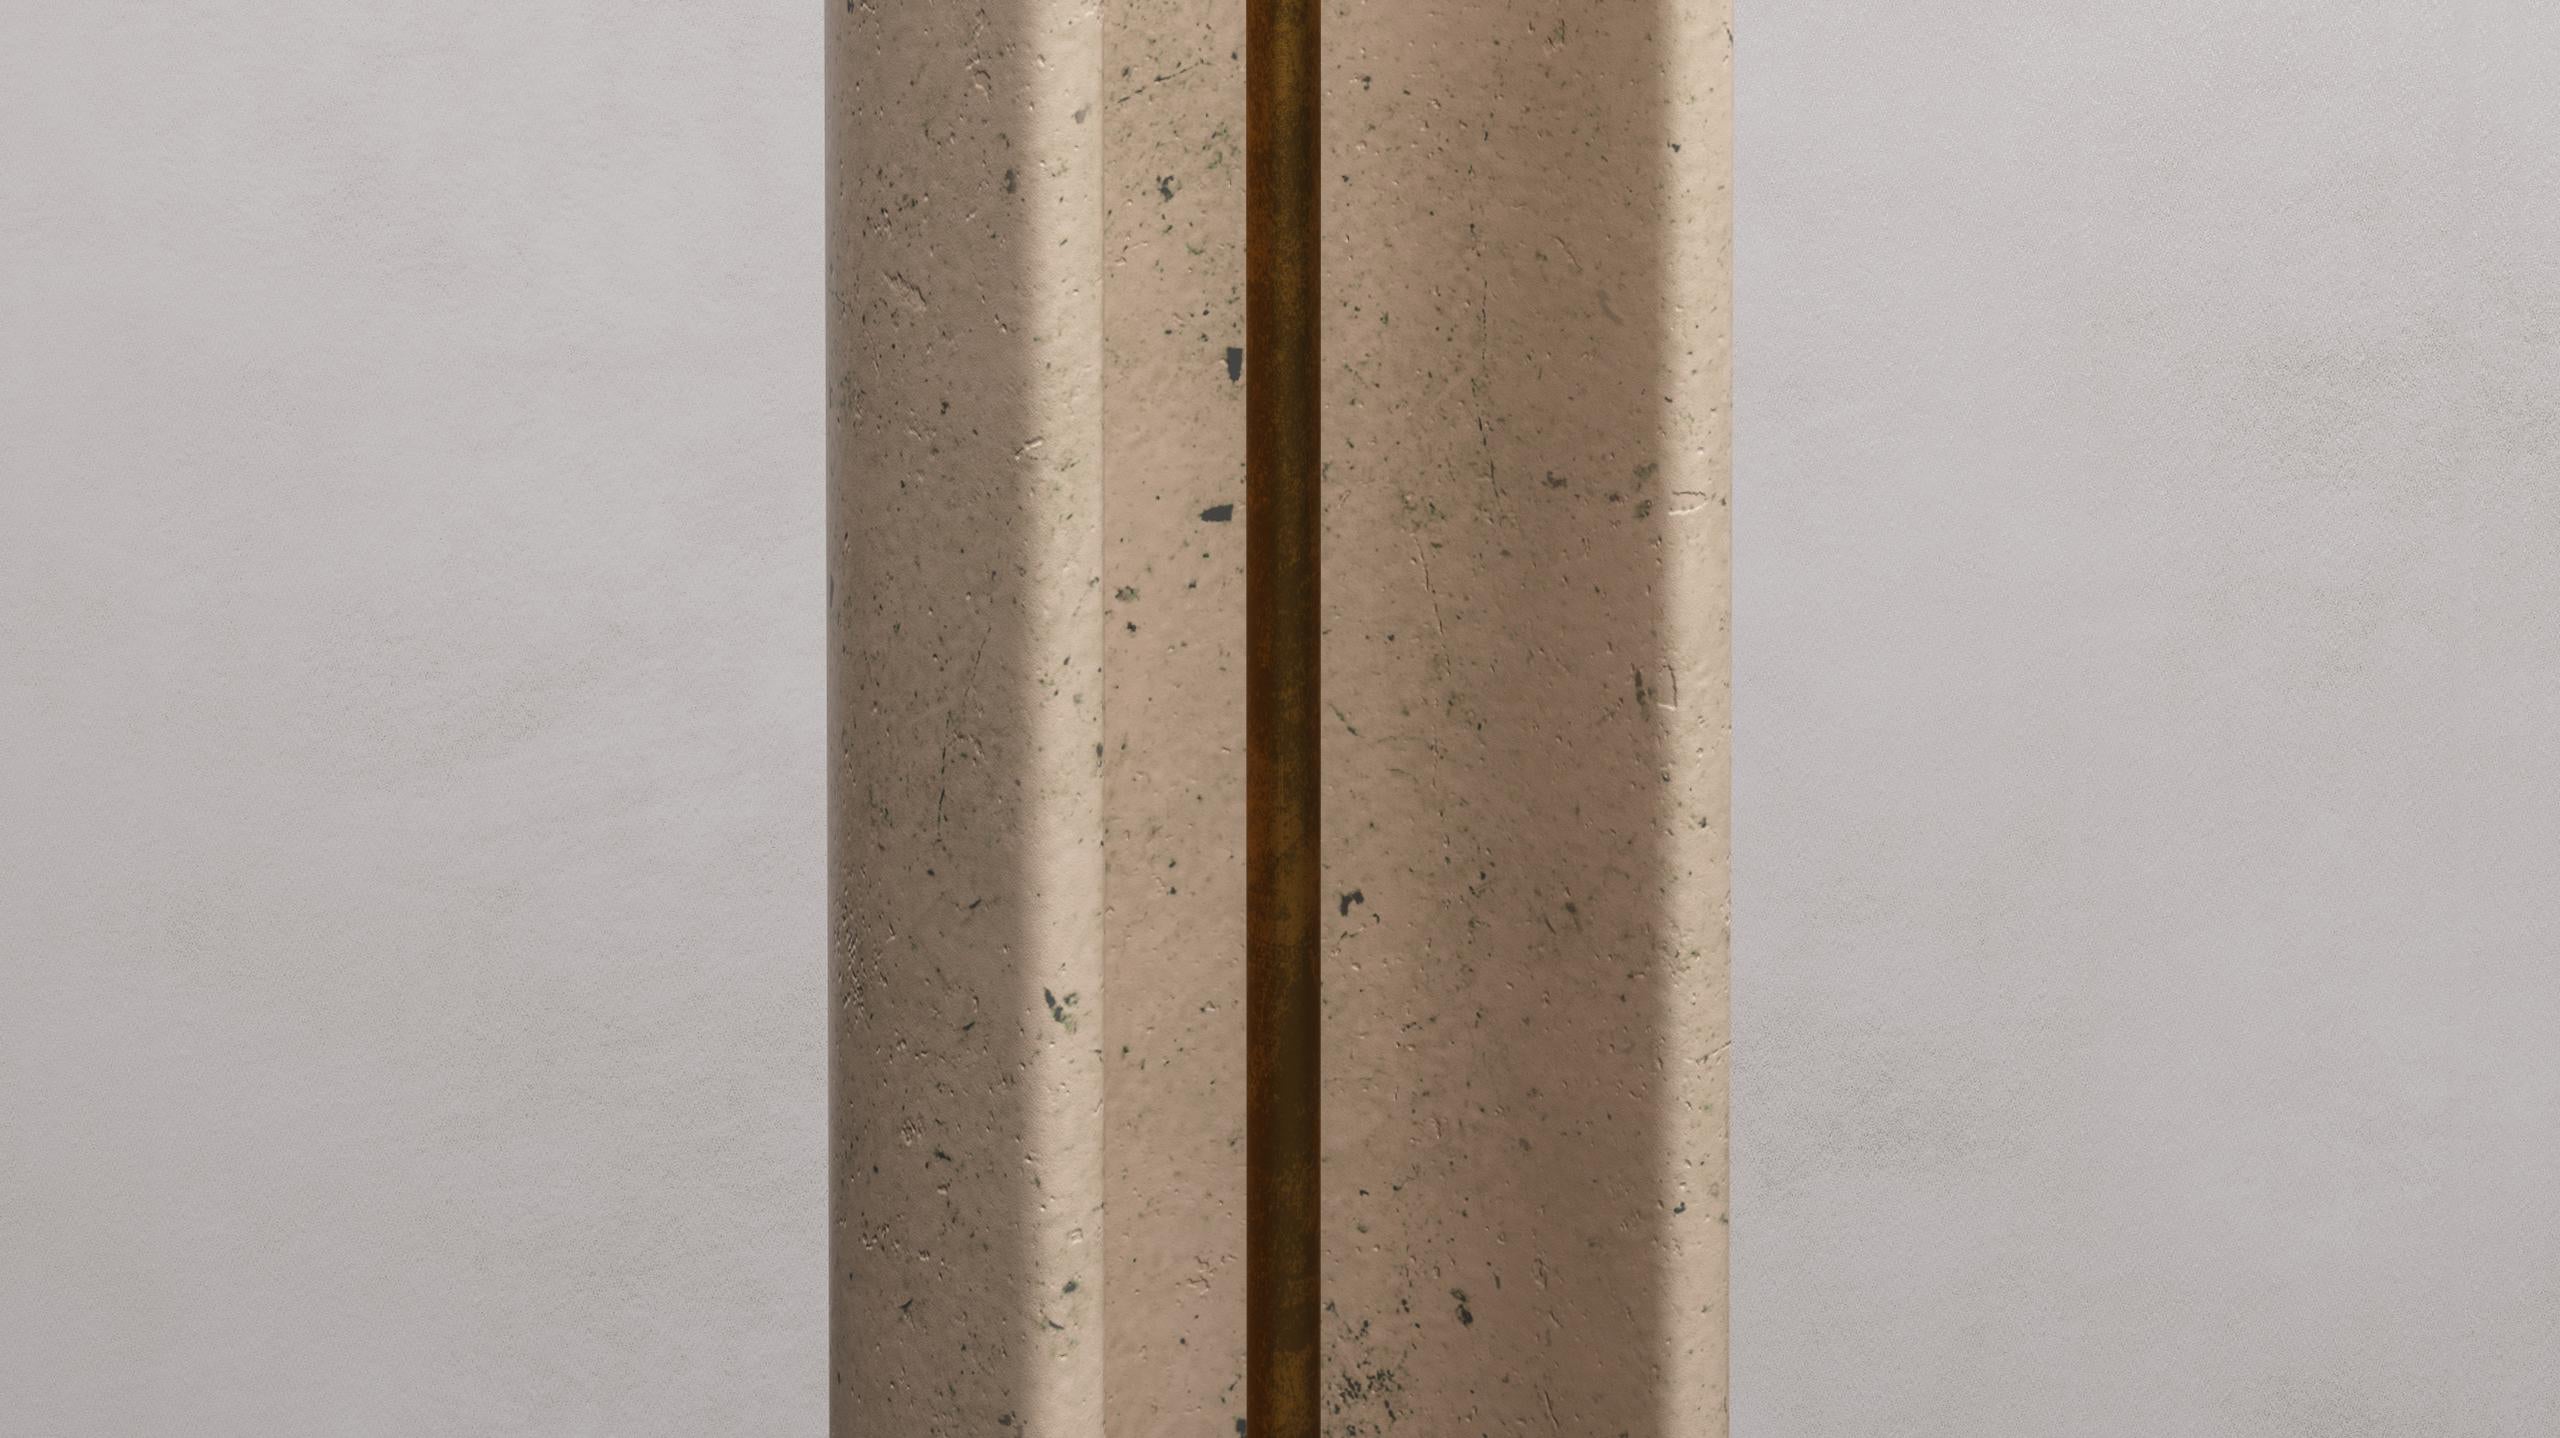 Emersion floor lamp by Arthur Vallin
Limited 12 + 2 A/P
Dimensions: W 12 x D 12 x H 54 inch
Materials: Travertin Navona, brass
Finishing: Matte Un-honed
Lava stone finish available.

French Artist, Designer, and Creative Director Arthur